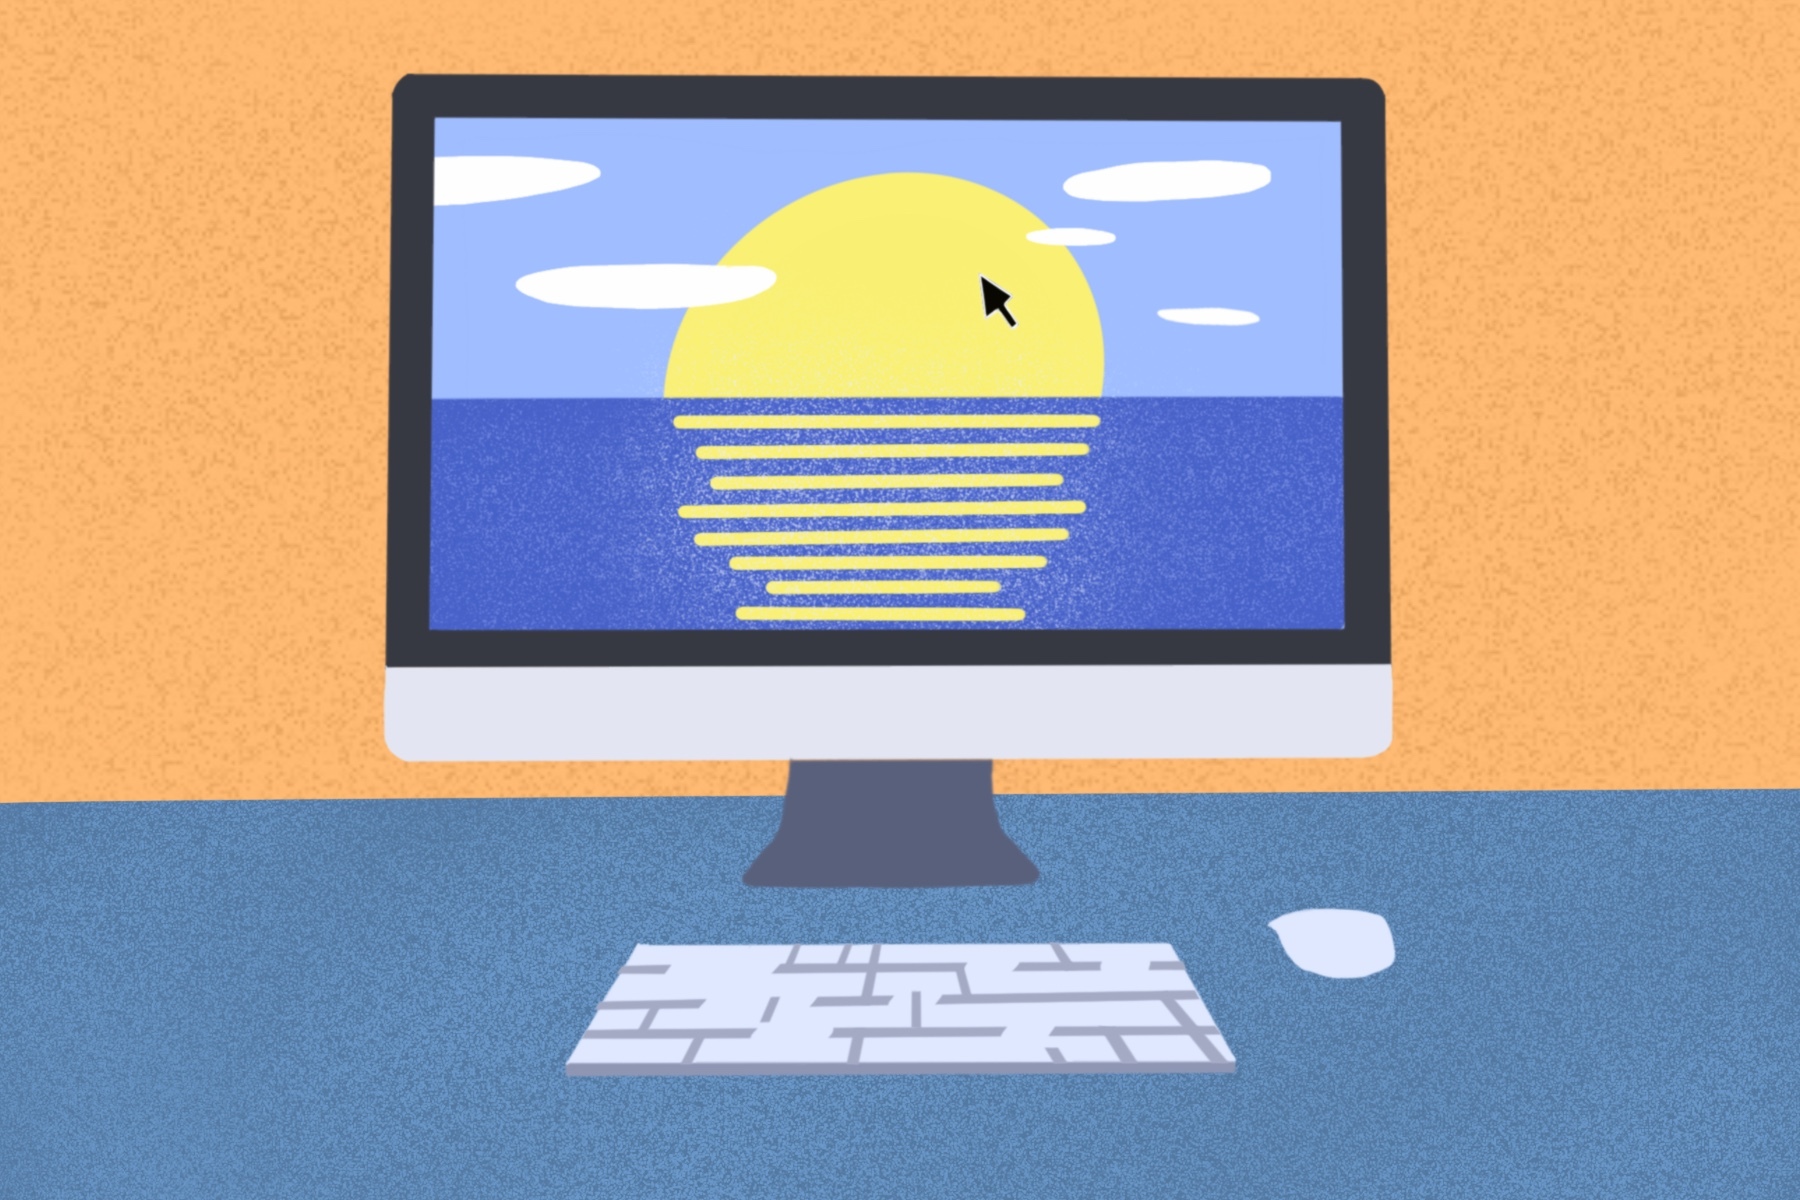 In an article about digital minimalism, an illustration of a computer displaying a sunset over water